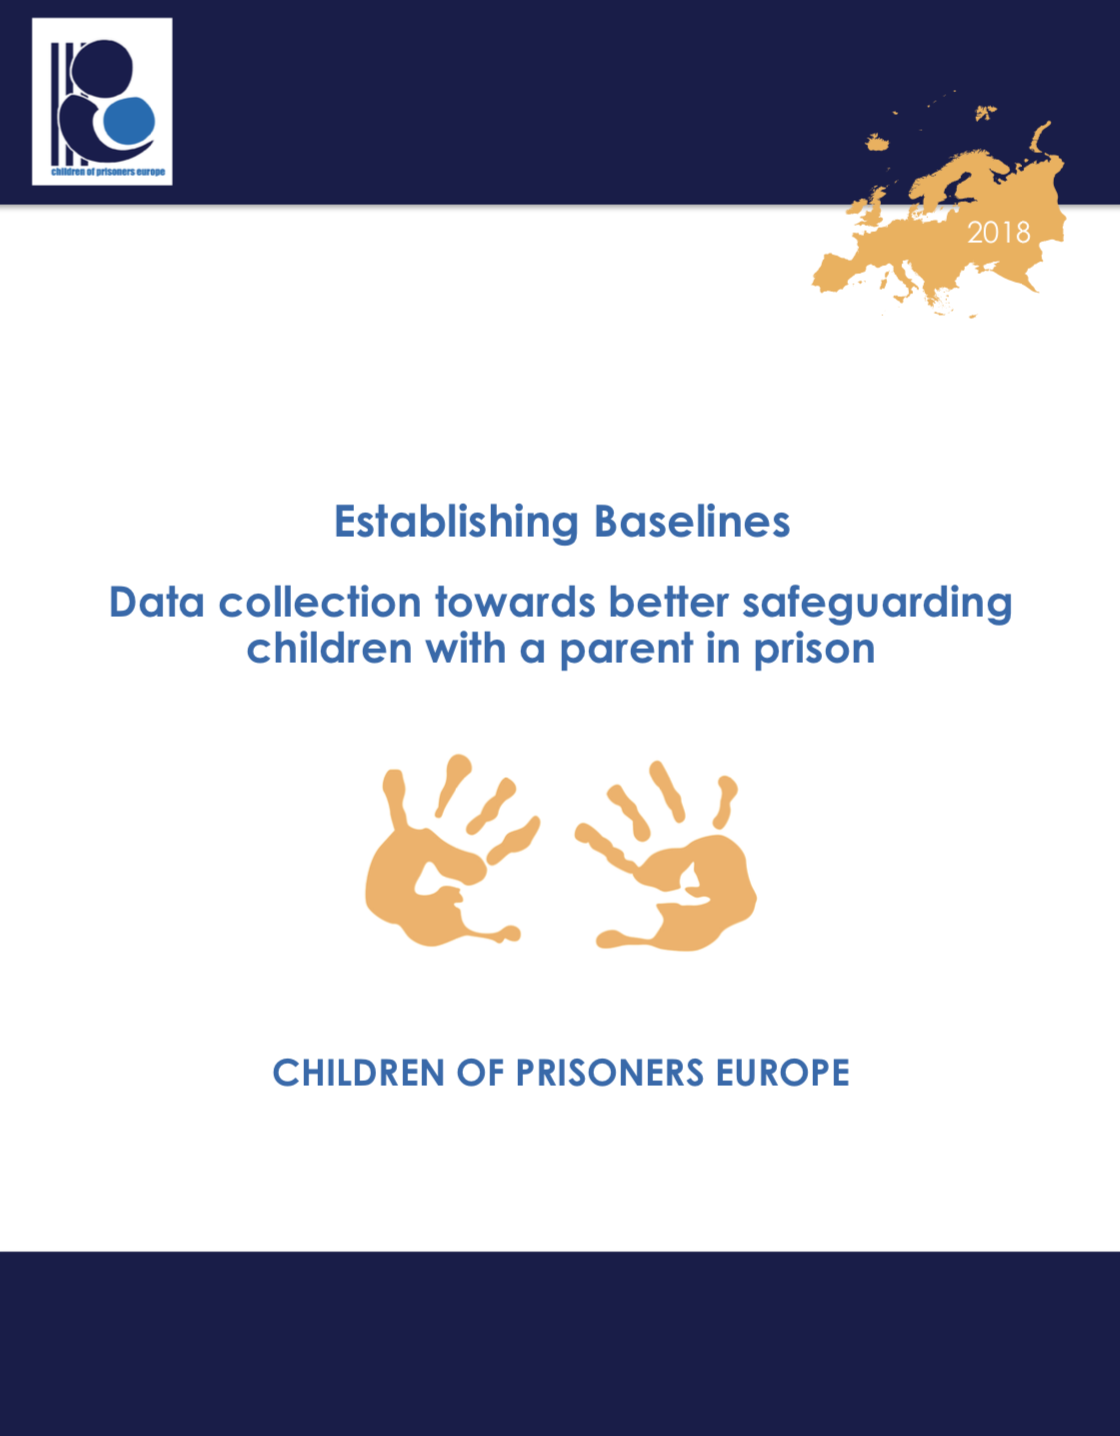 Establishing Baselines: Data collection towards better safeguarding children with a parent in prison (2018)